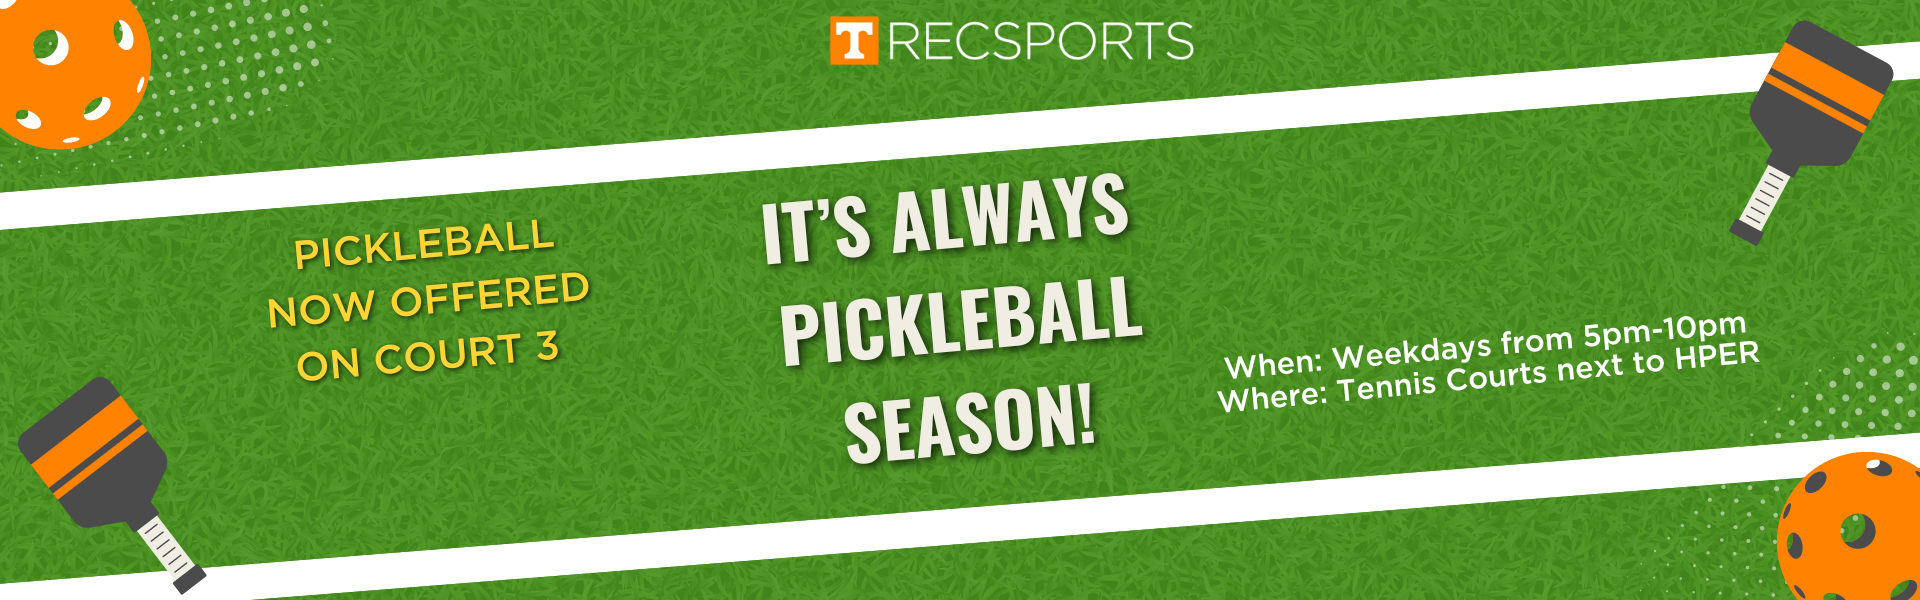 Promotions – Pickleball Now Available (Website Banner)